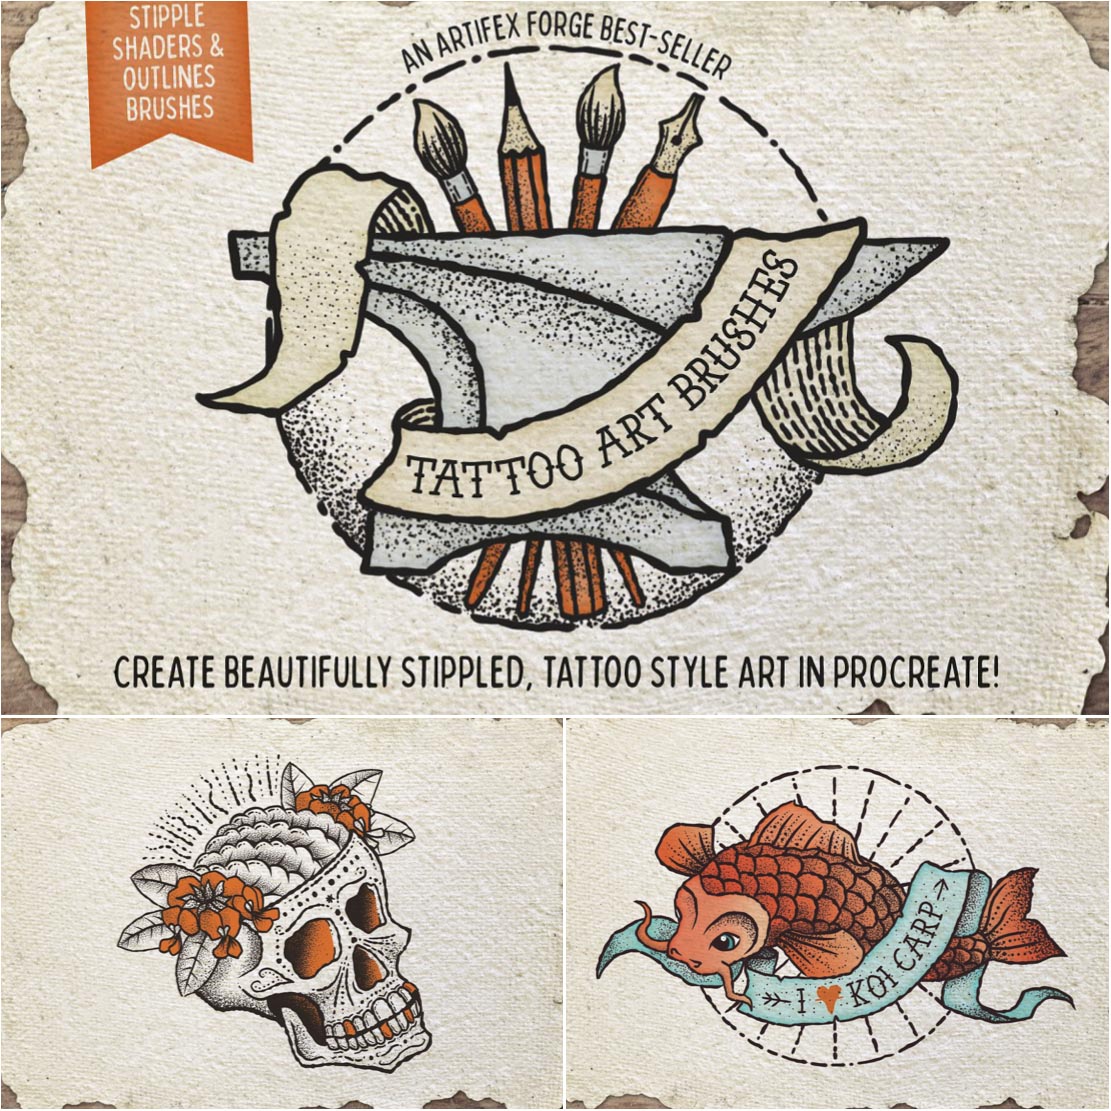 Tattoo style art brushes  Free download